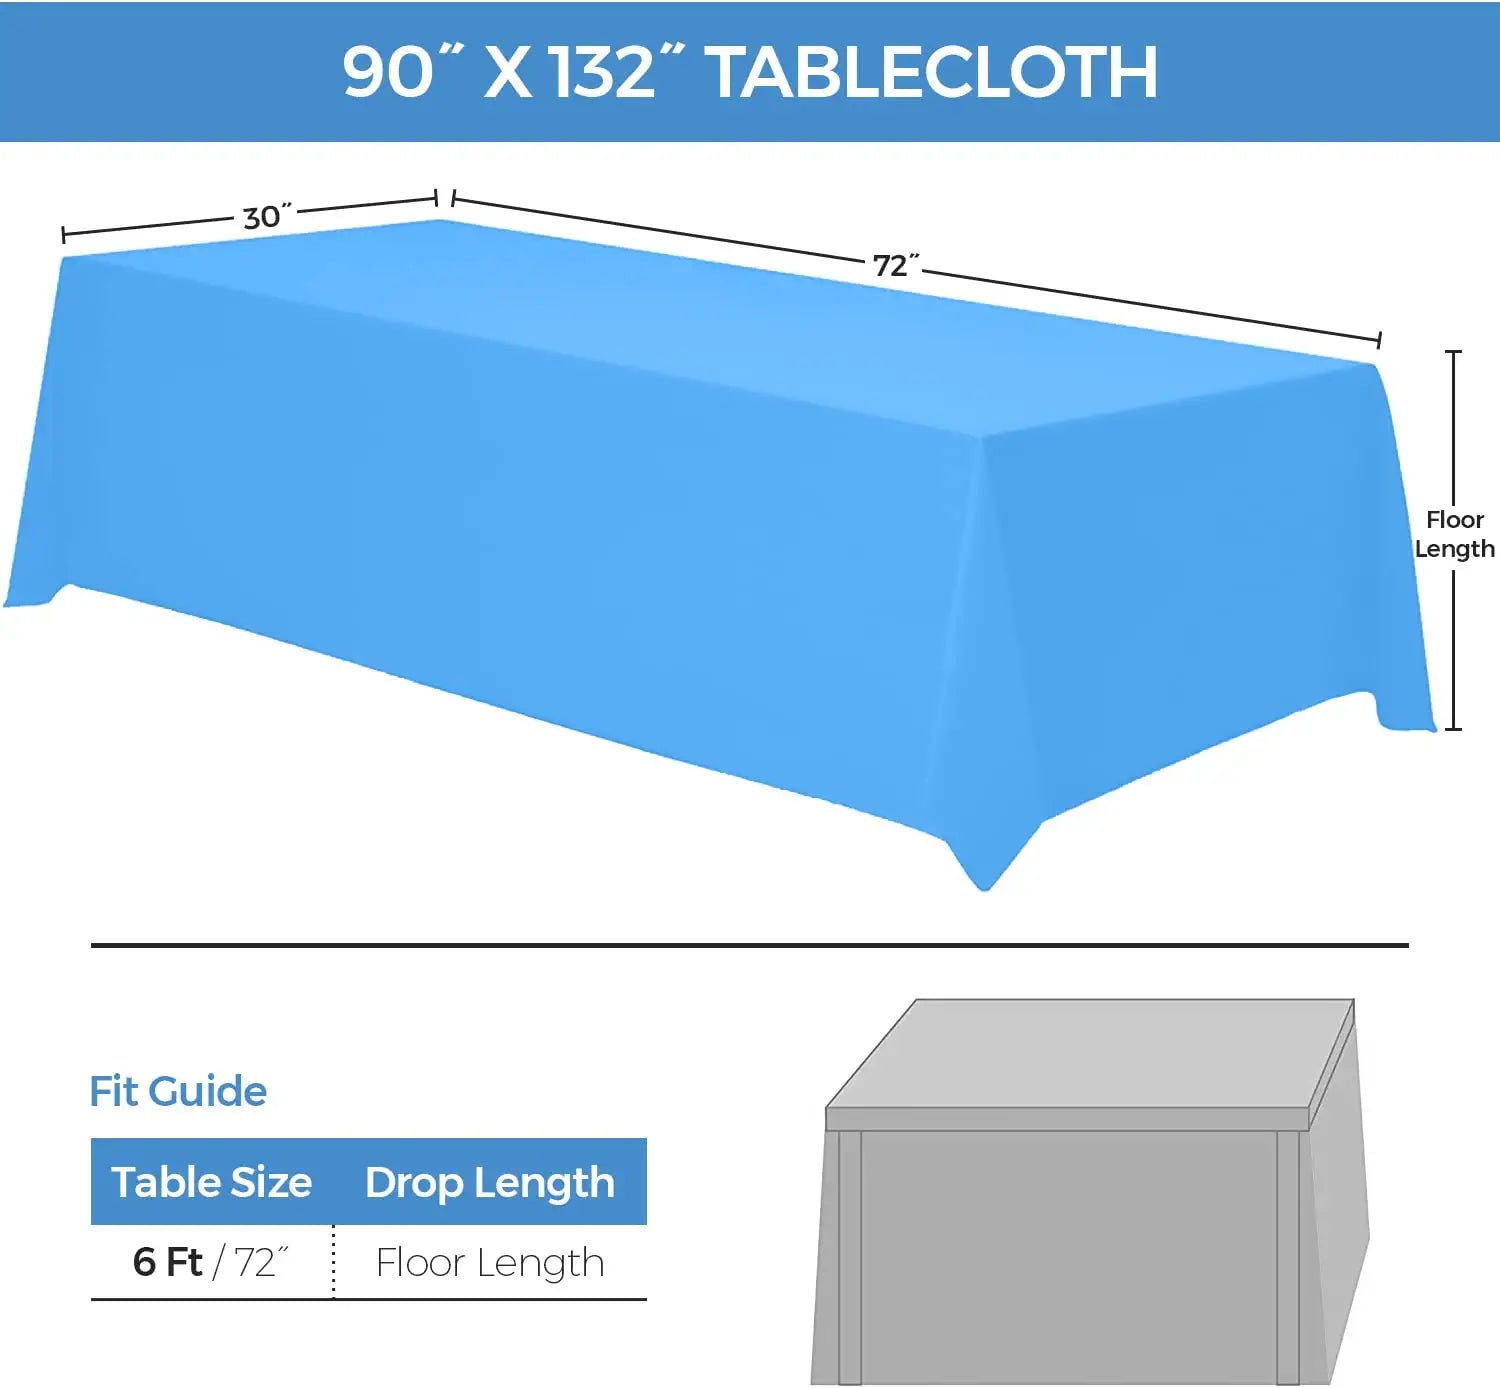 6 Ft tablecloth